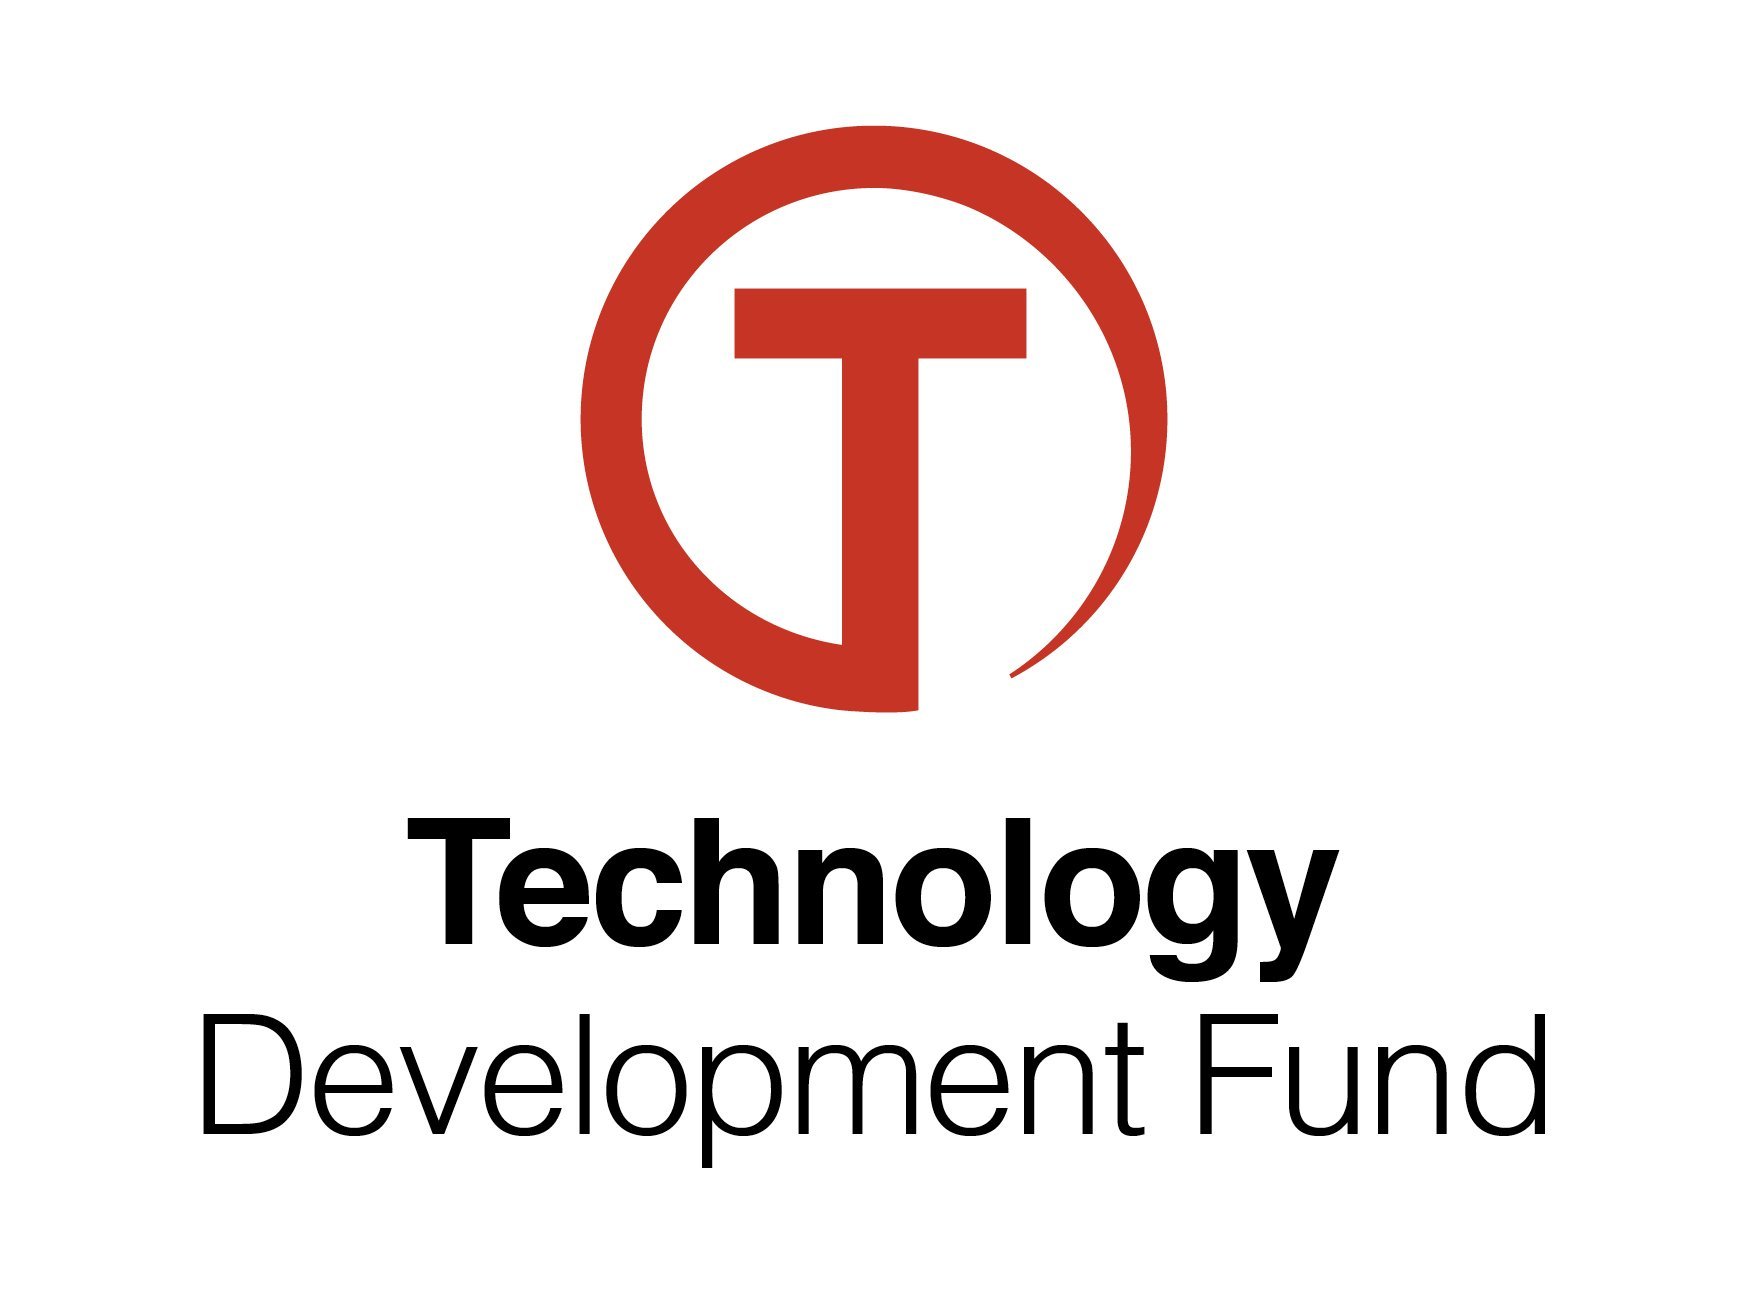 CRI’s projects have received funding from the Icelandic Technology Development Fund